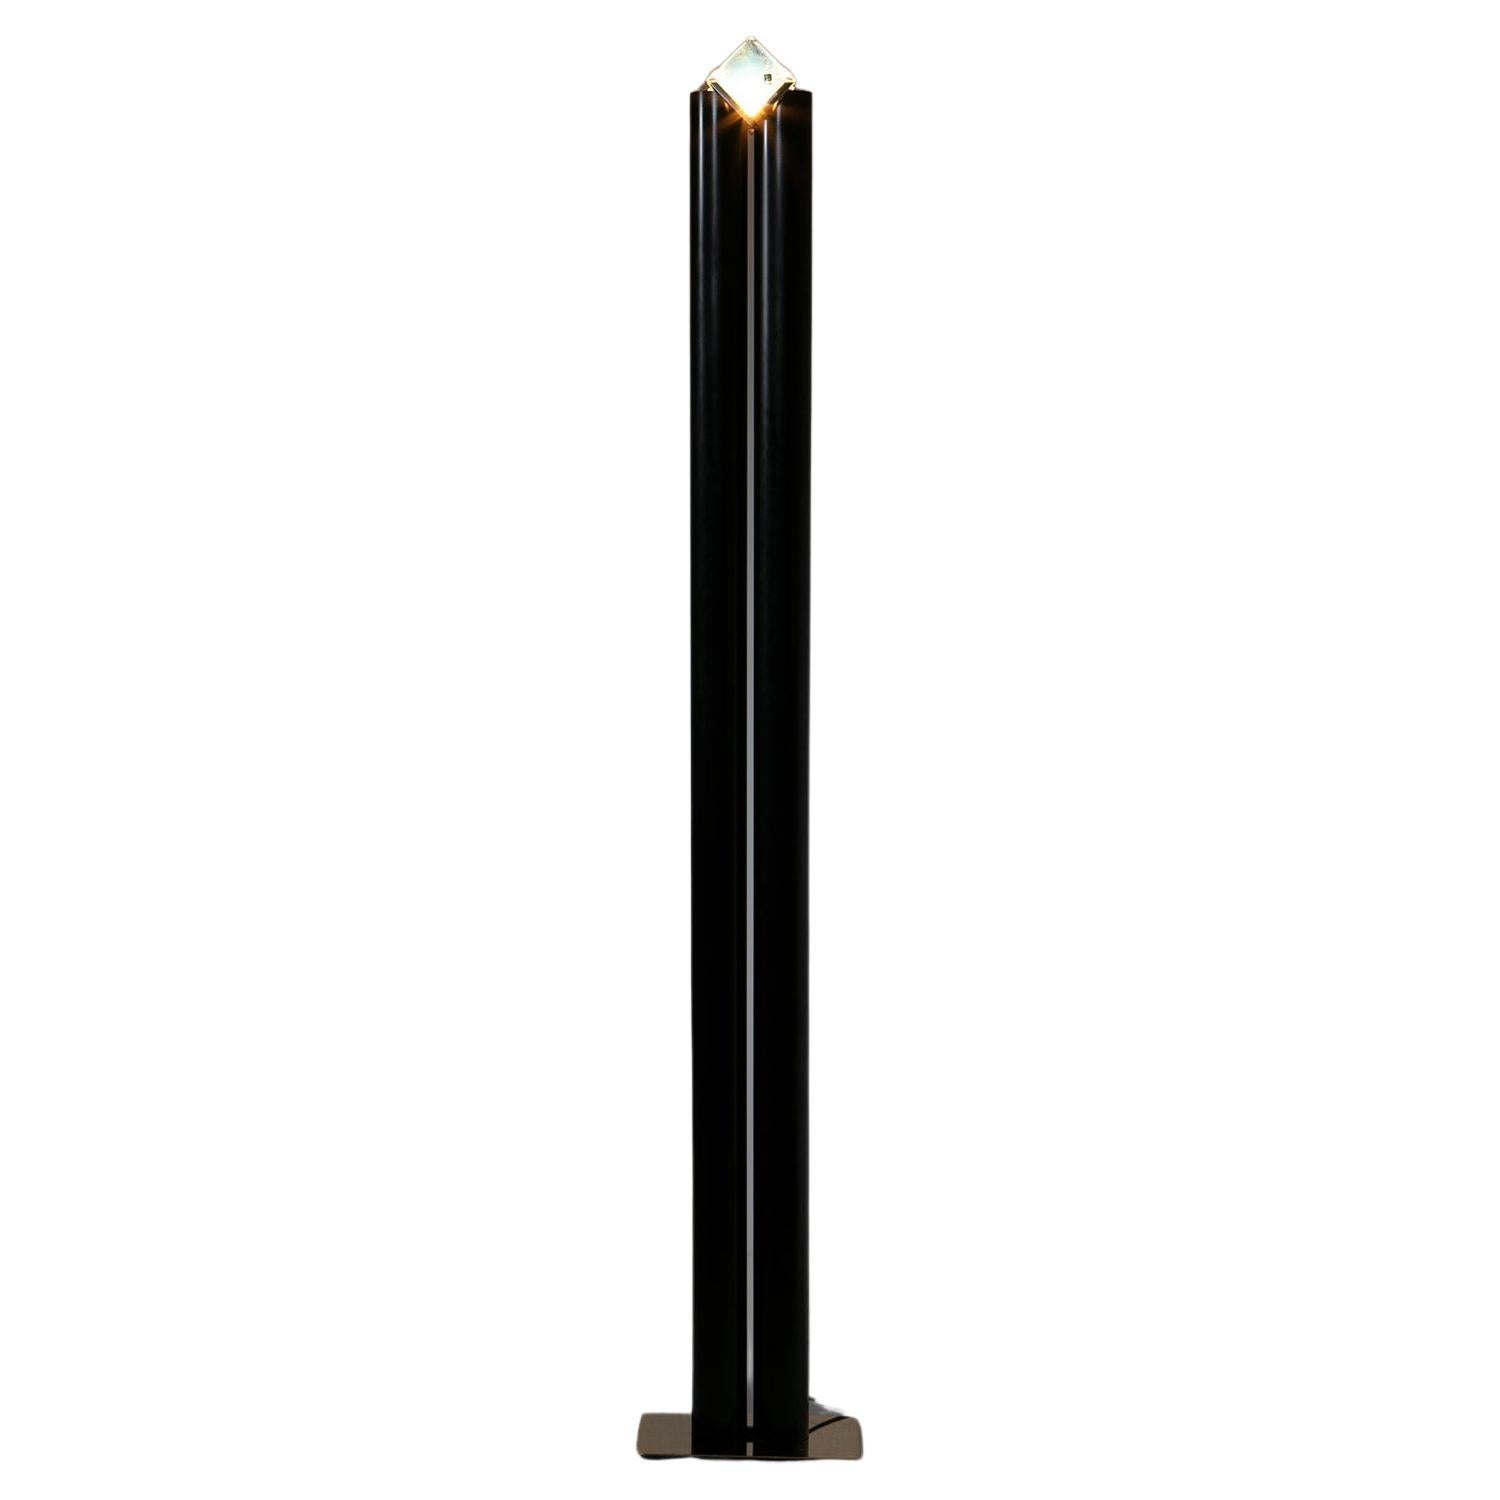 Metal floor lamp by iTre Murano.
Gold floor plate supporting two metal tubes with a bright glass top.
Silent totemic presence for domestic interiors.